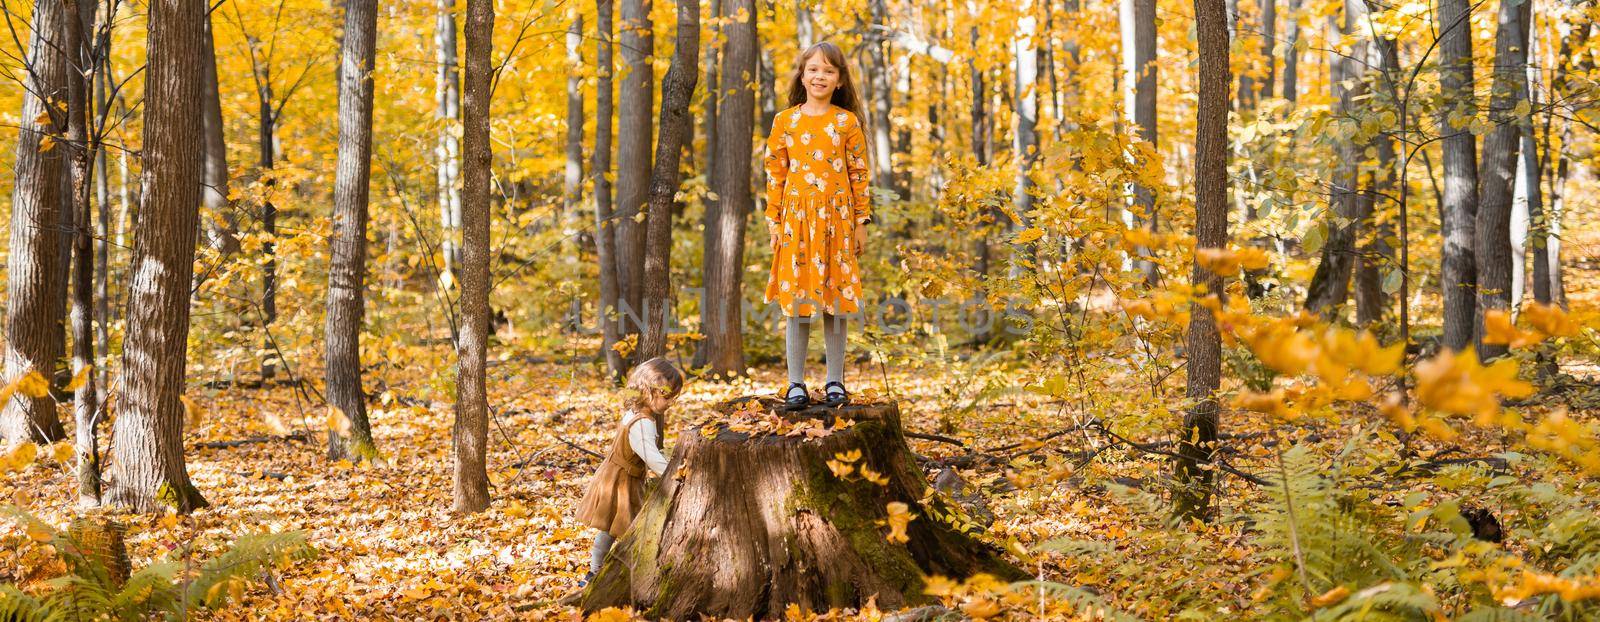 Little kid girl with autumn orange leaves in a park. Lifestyle, fall season and children concept